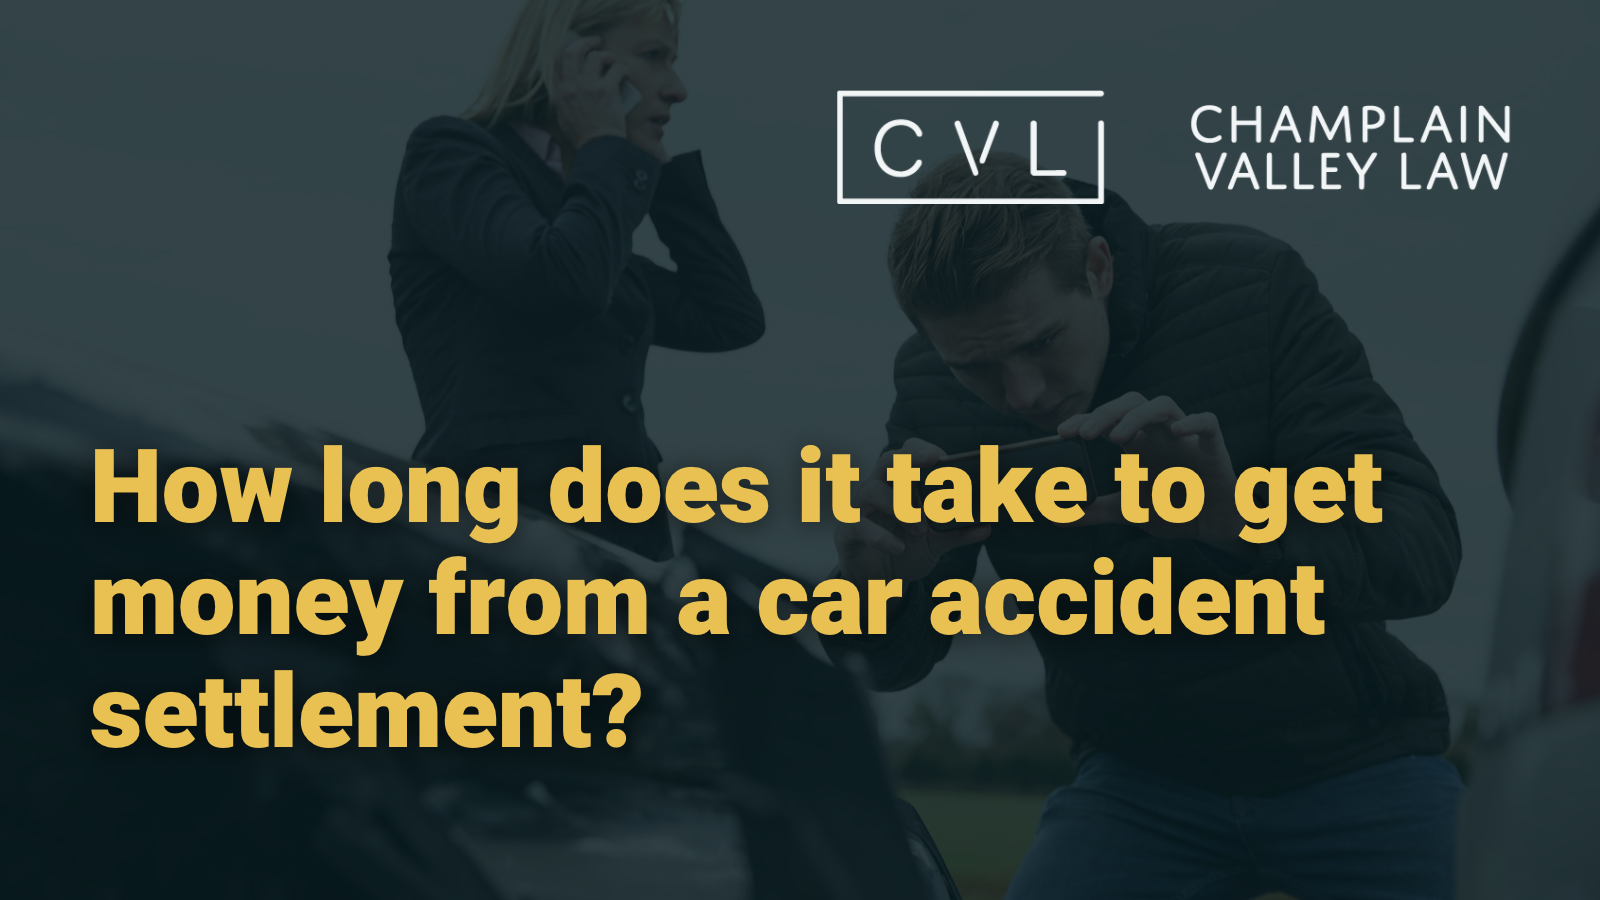 How long does it take to get money from a car accident settlement in vermont - Champlain Valley Law - Attorney Drew Palcsik